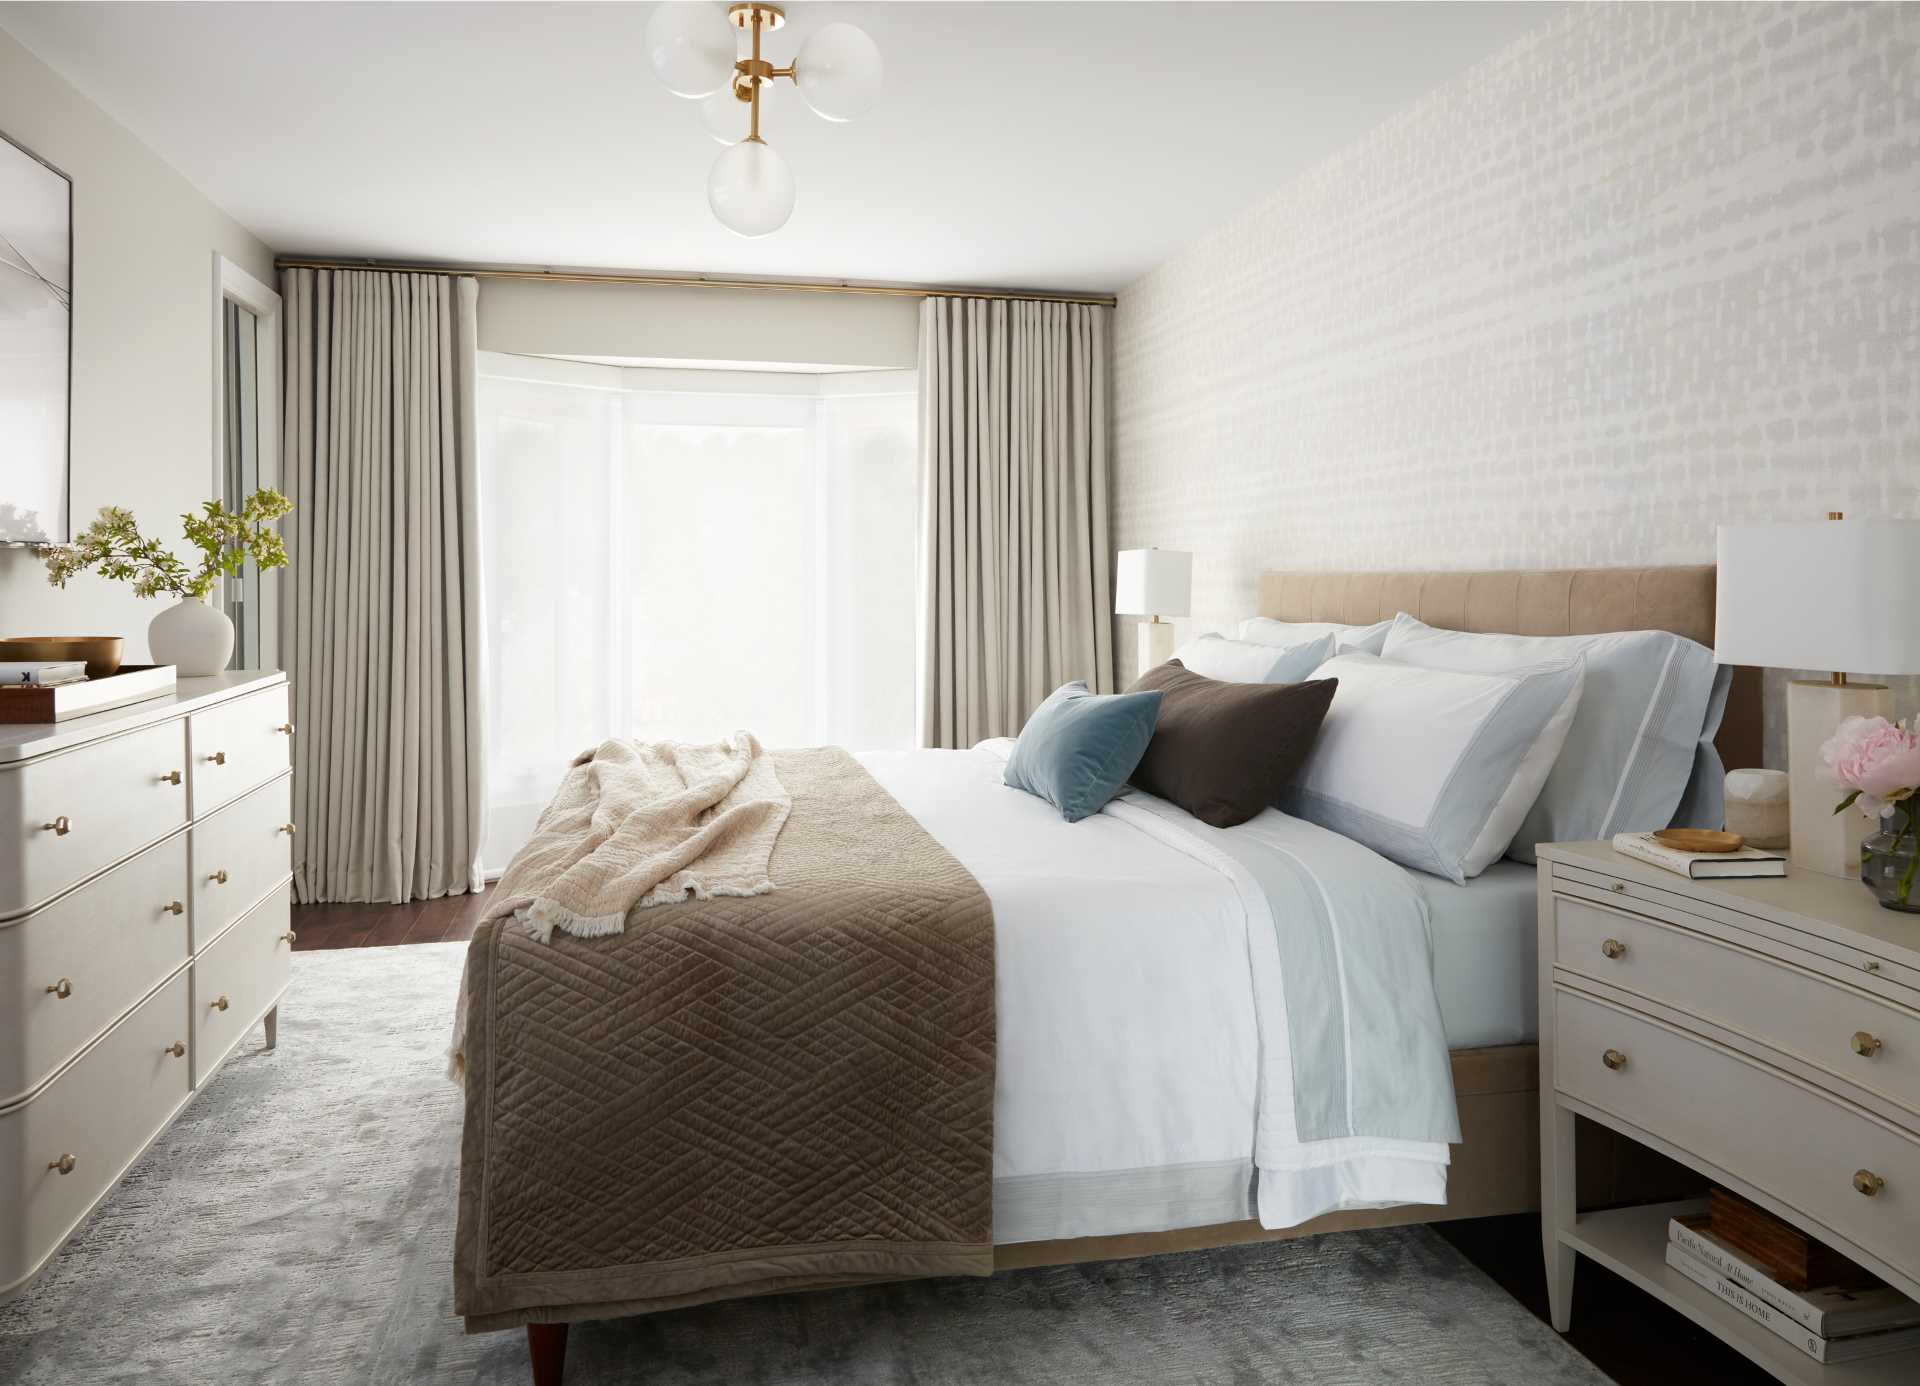 In the primary bedroom, contemporary furnishings make for a calm environment, while a closet with mirrored doors reflects light around the room.